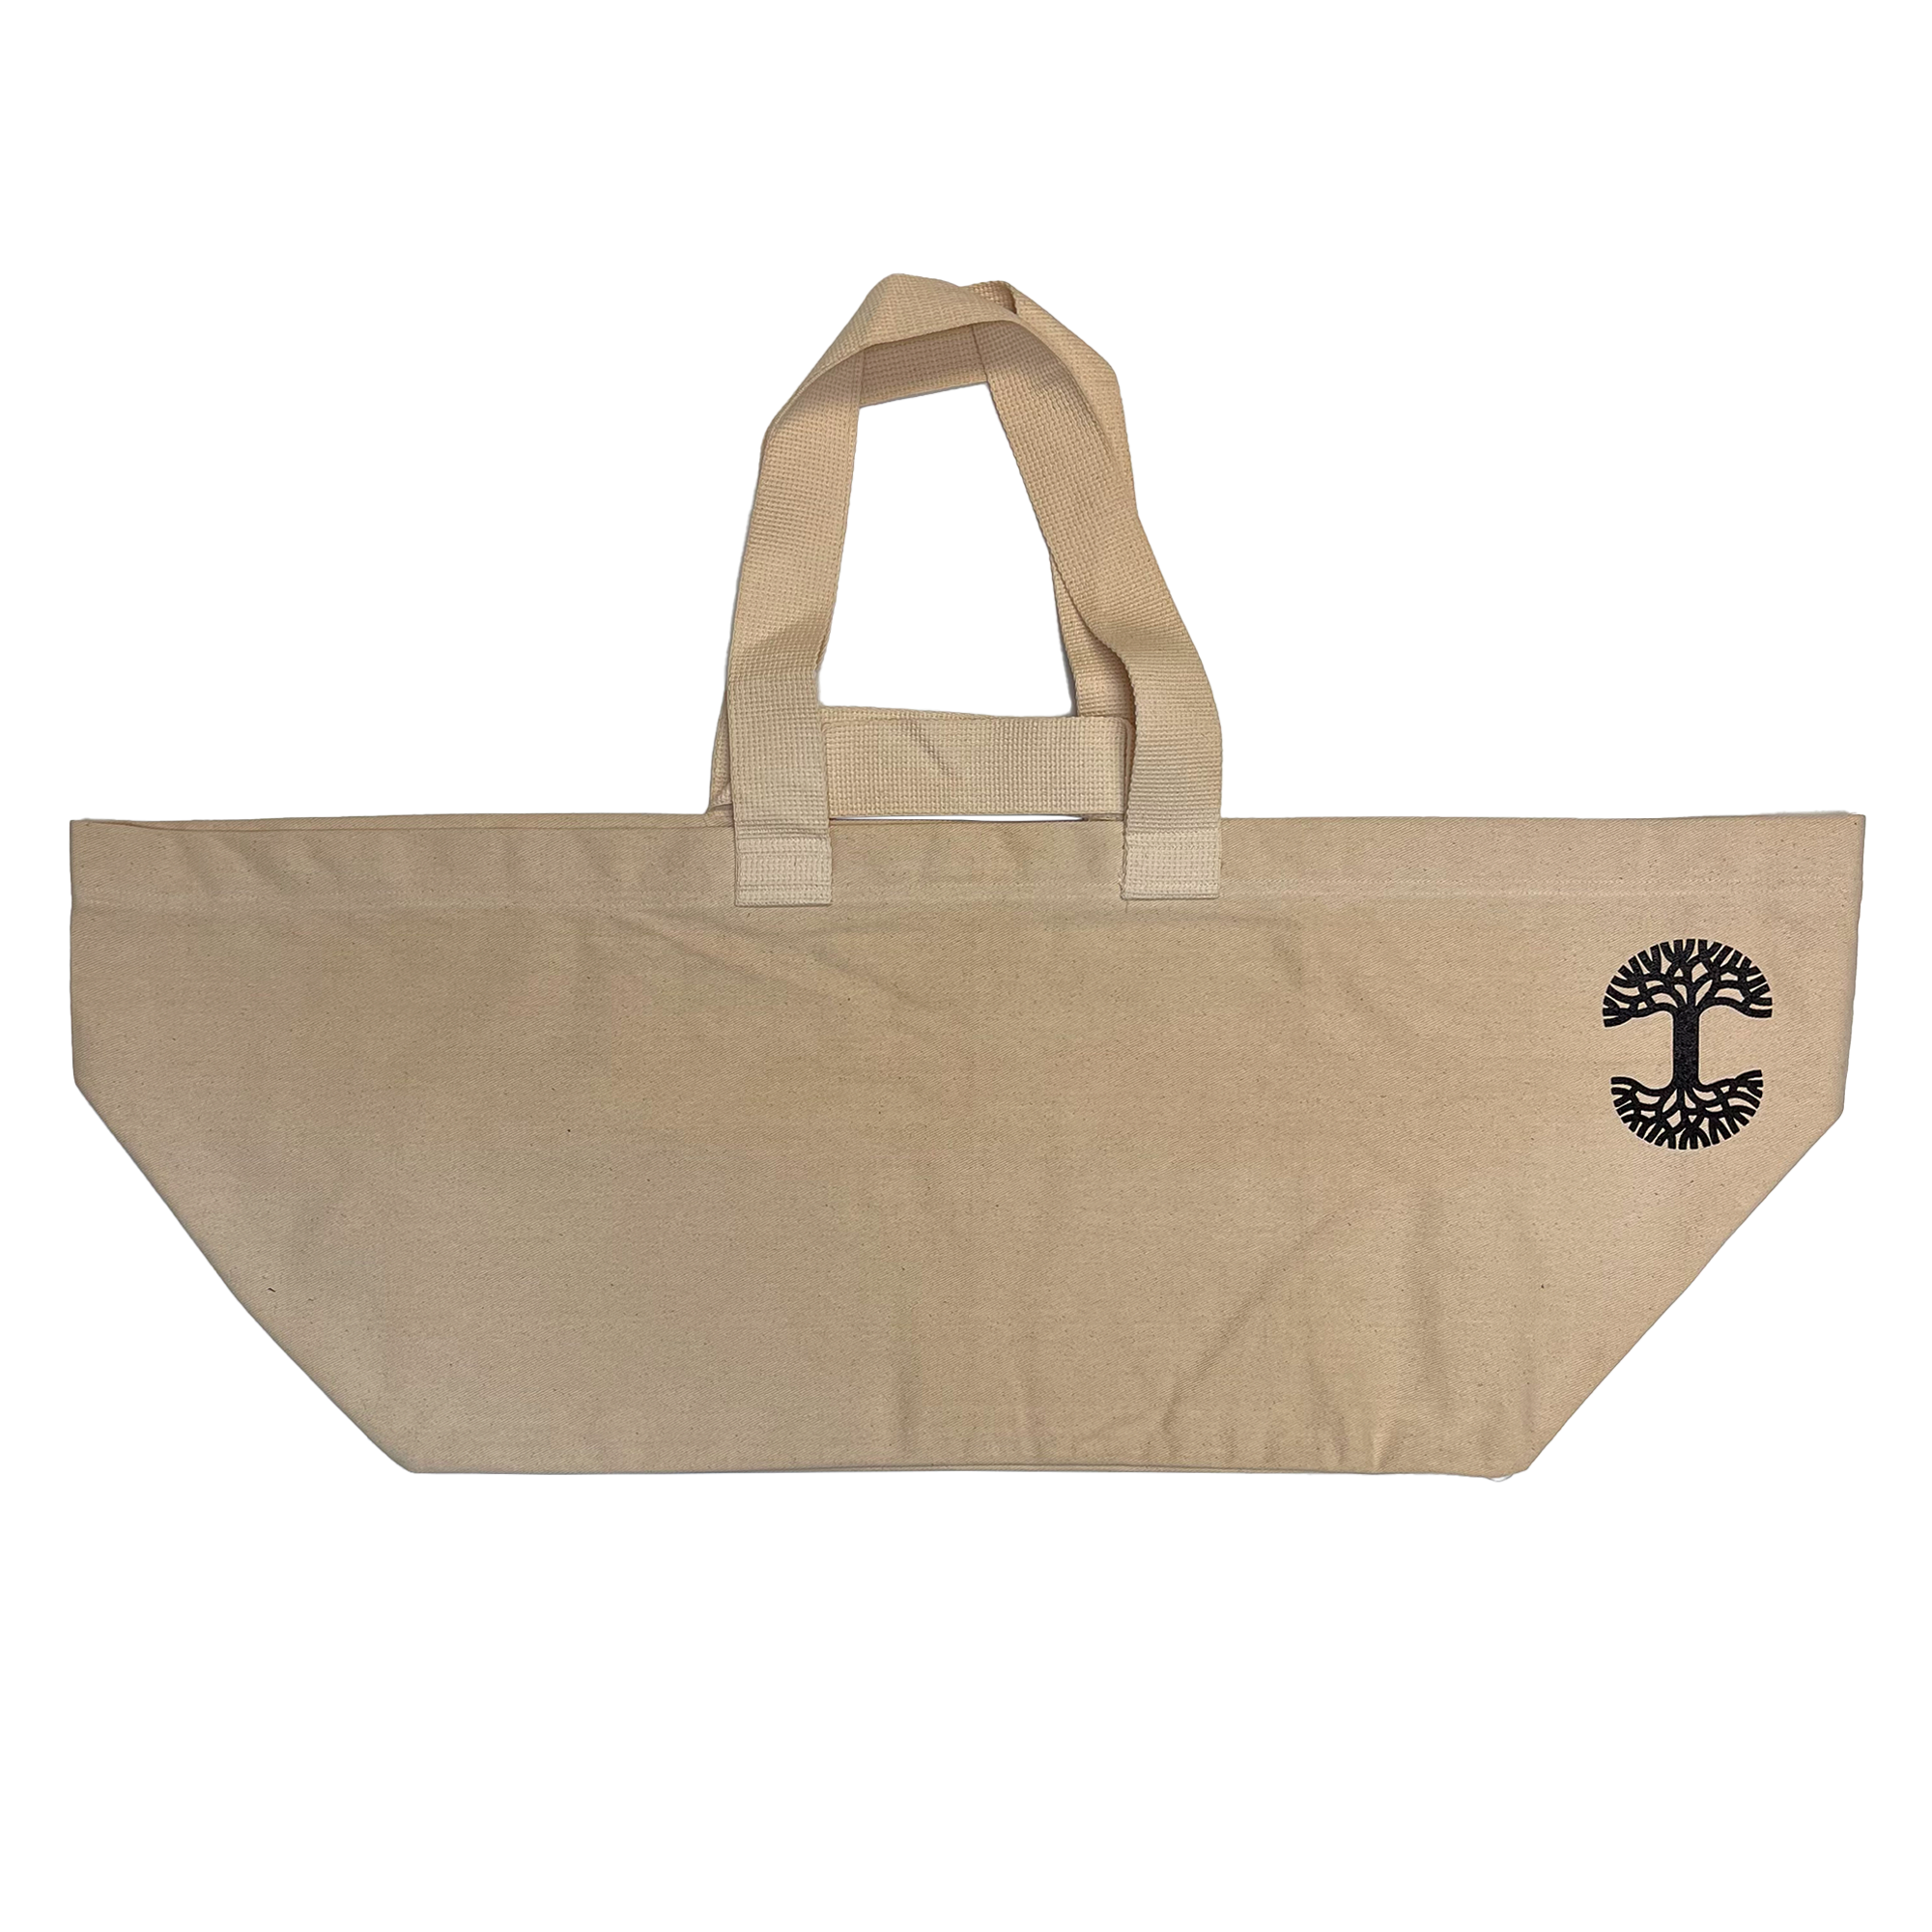 Extra wide natural colored bull denim shopping tote bag with Oaklandish tree logo at top corner of bag.